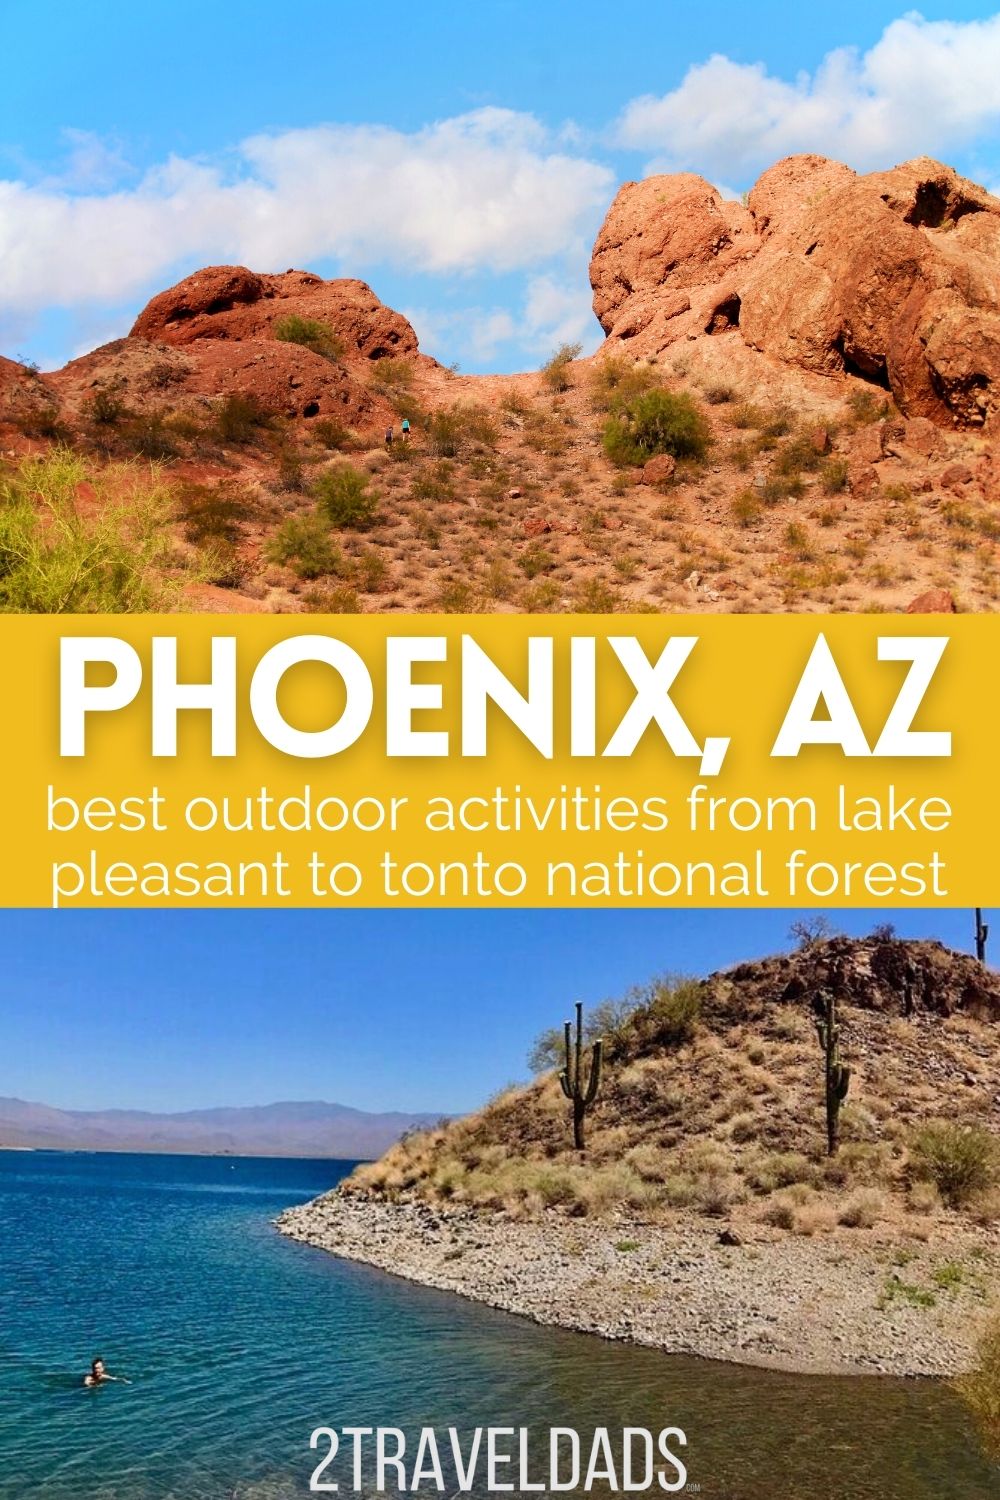 Outdoor things to do around Phoenix are plentiful, even in the heat. From getting on the water to hiking in Tonto National Forest, the best things to do outside around Phoenix.